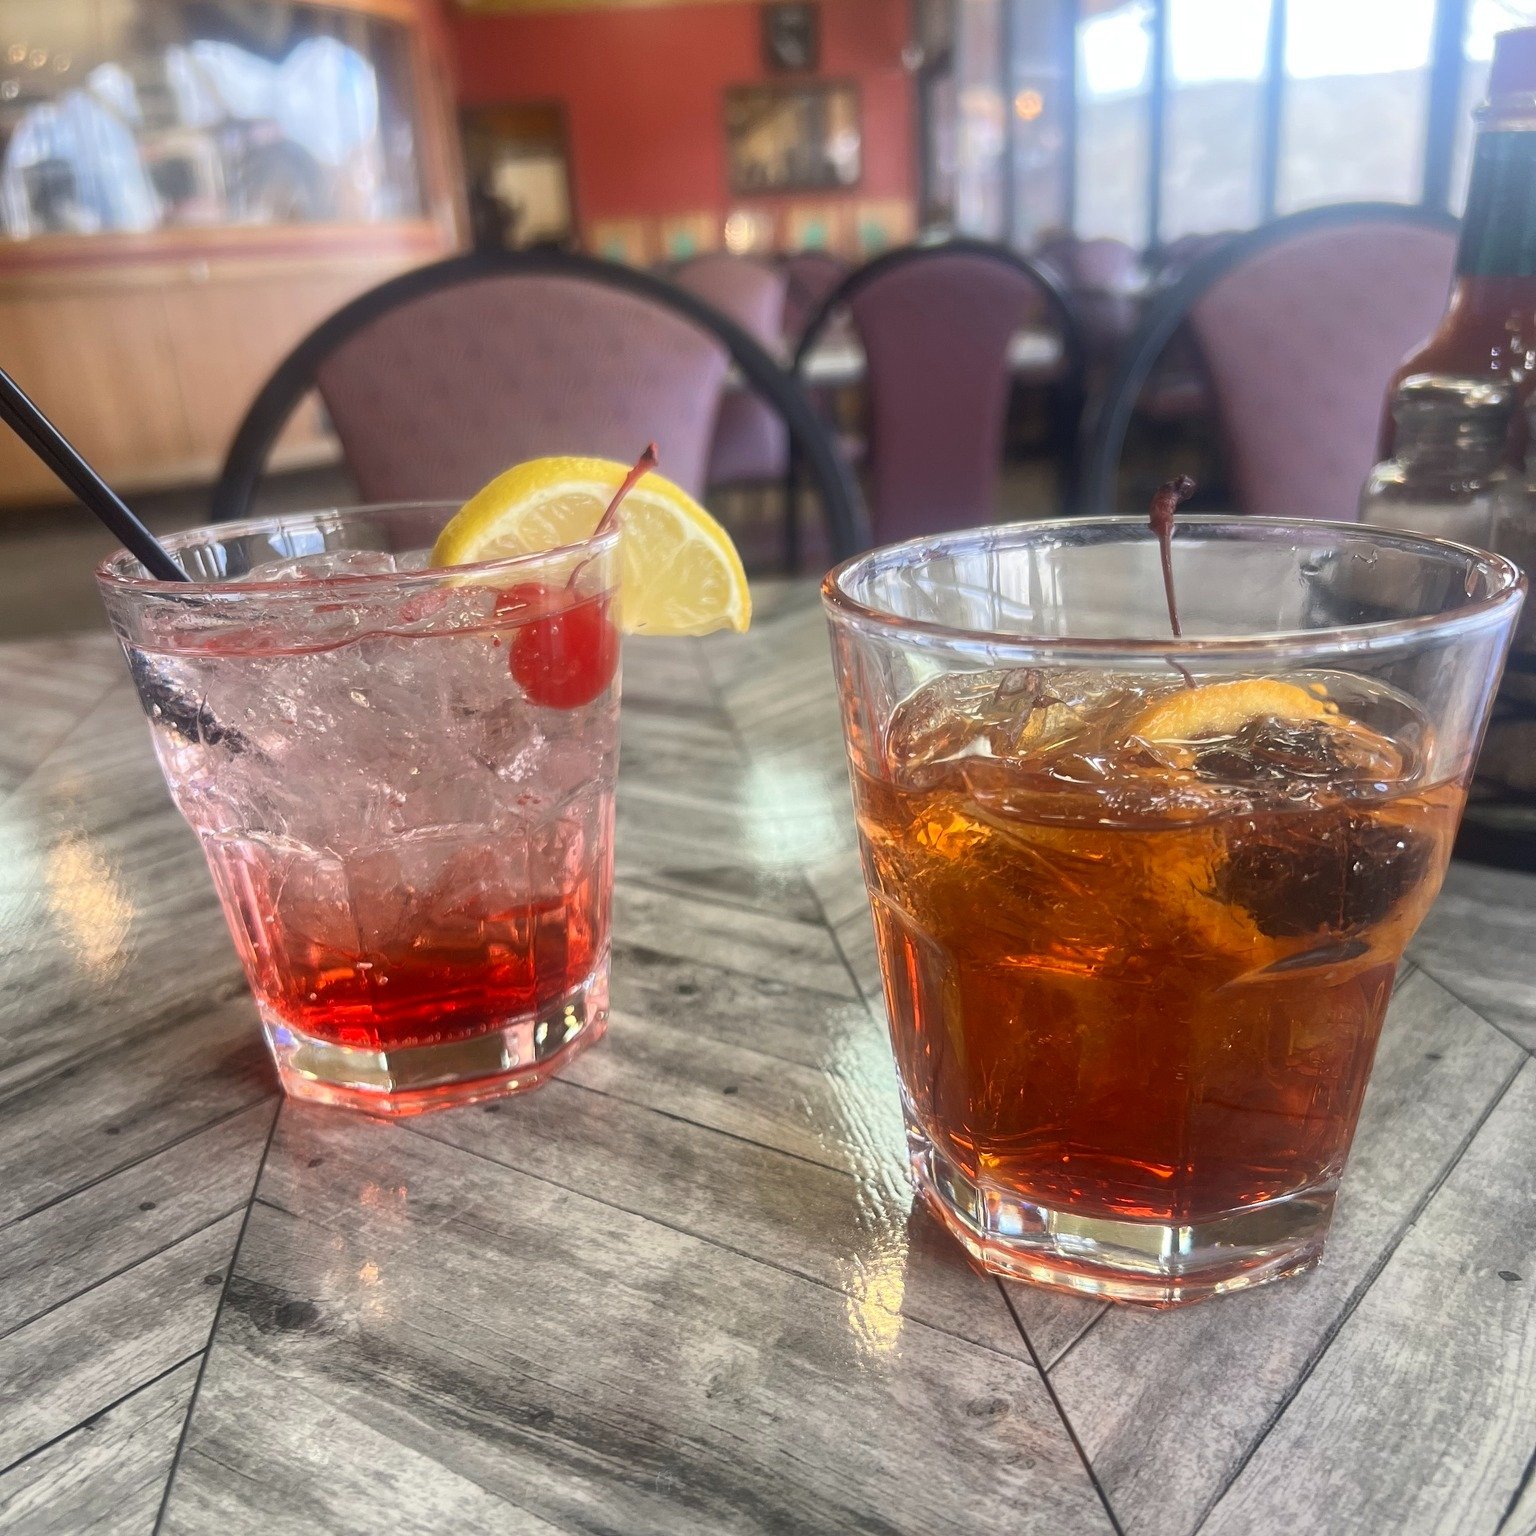 Sipping our way into relaxation! 🍹☀️ Join us at The Klub Ruby View and find your new favorite cocktail. Two is always better than one!

📍 2100 Ruby View Dr, Elko, NV 89801

#rubyviewgolfclub #elkogolf #KlubVibes